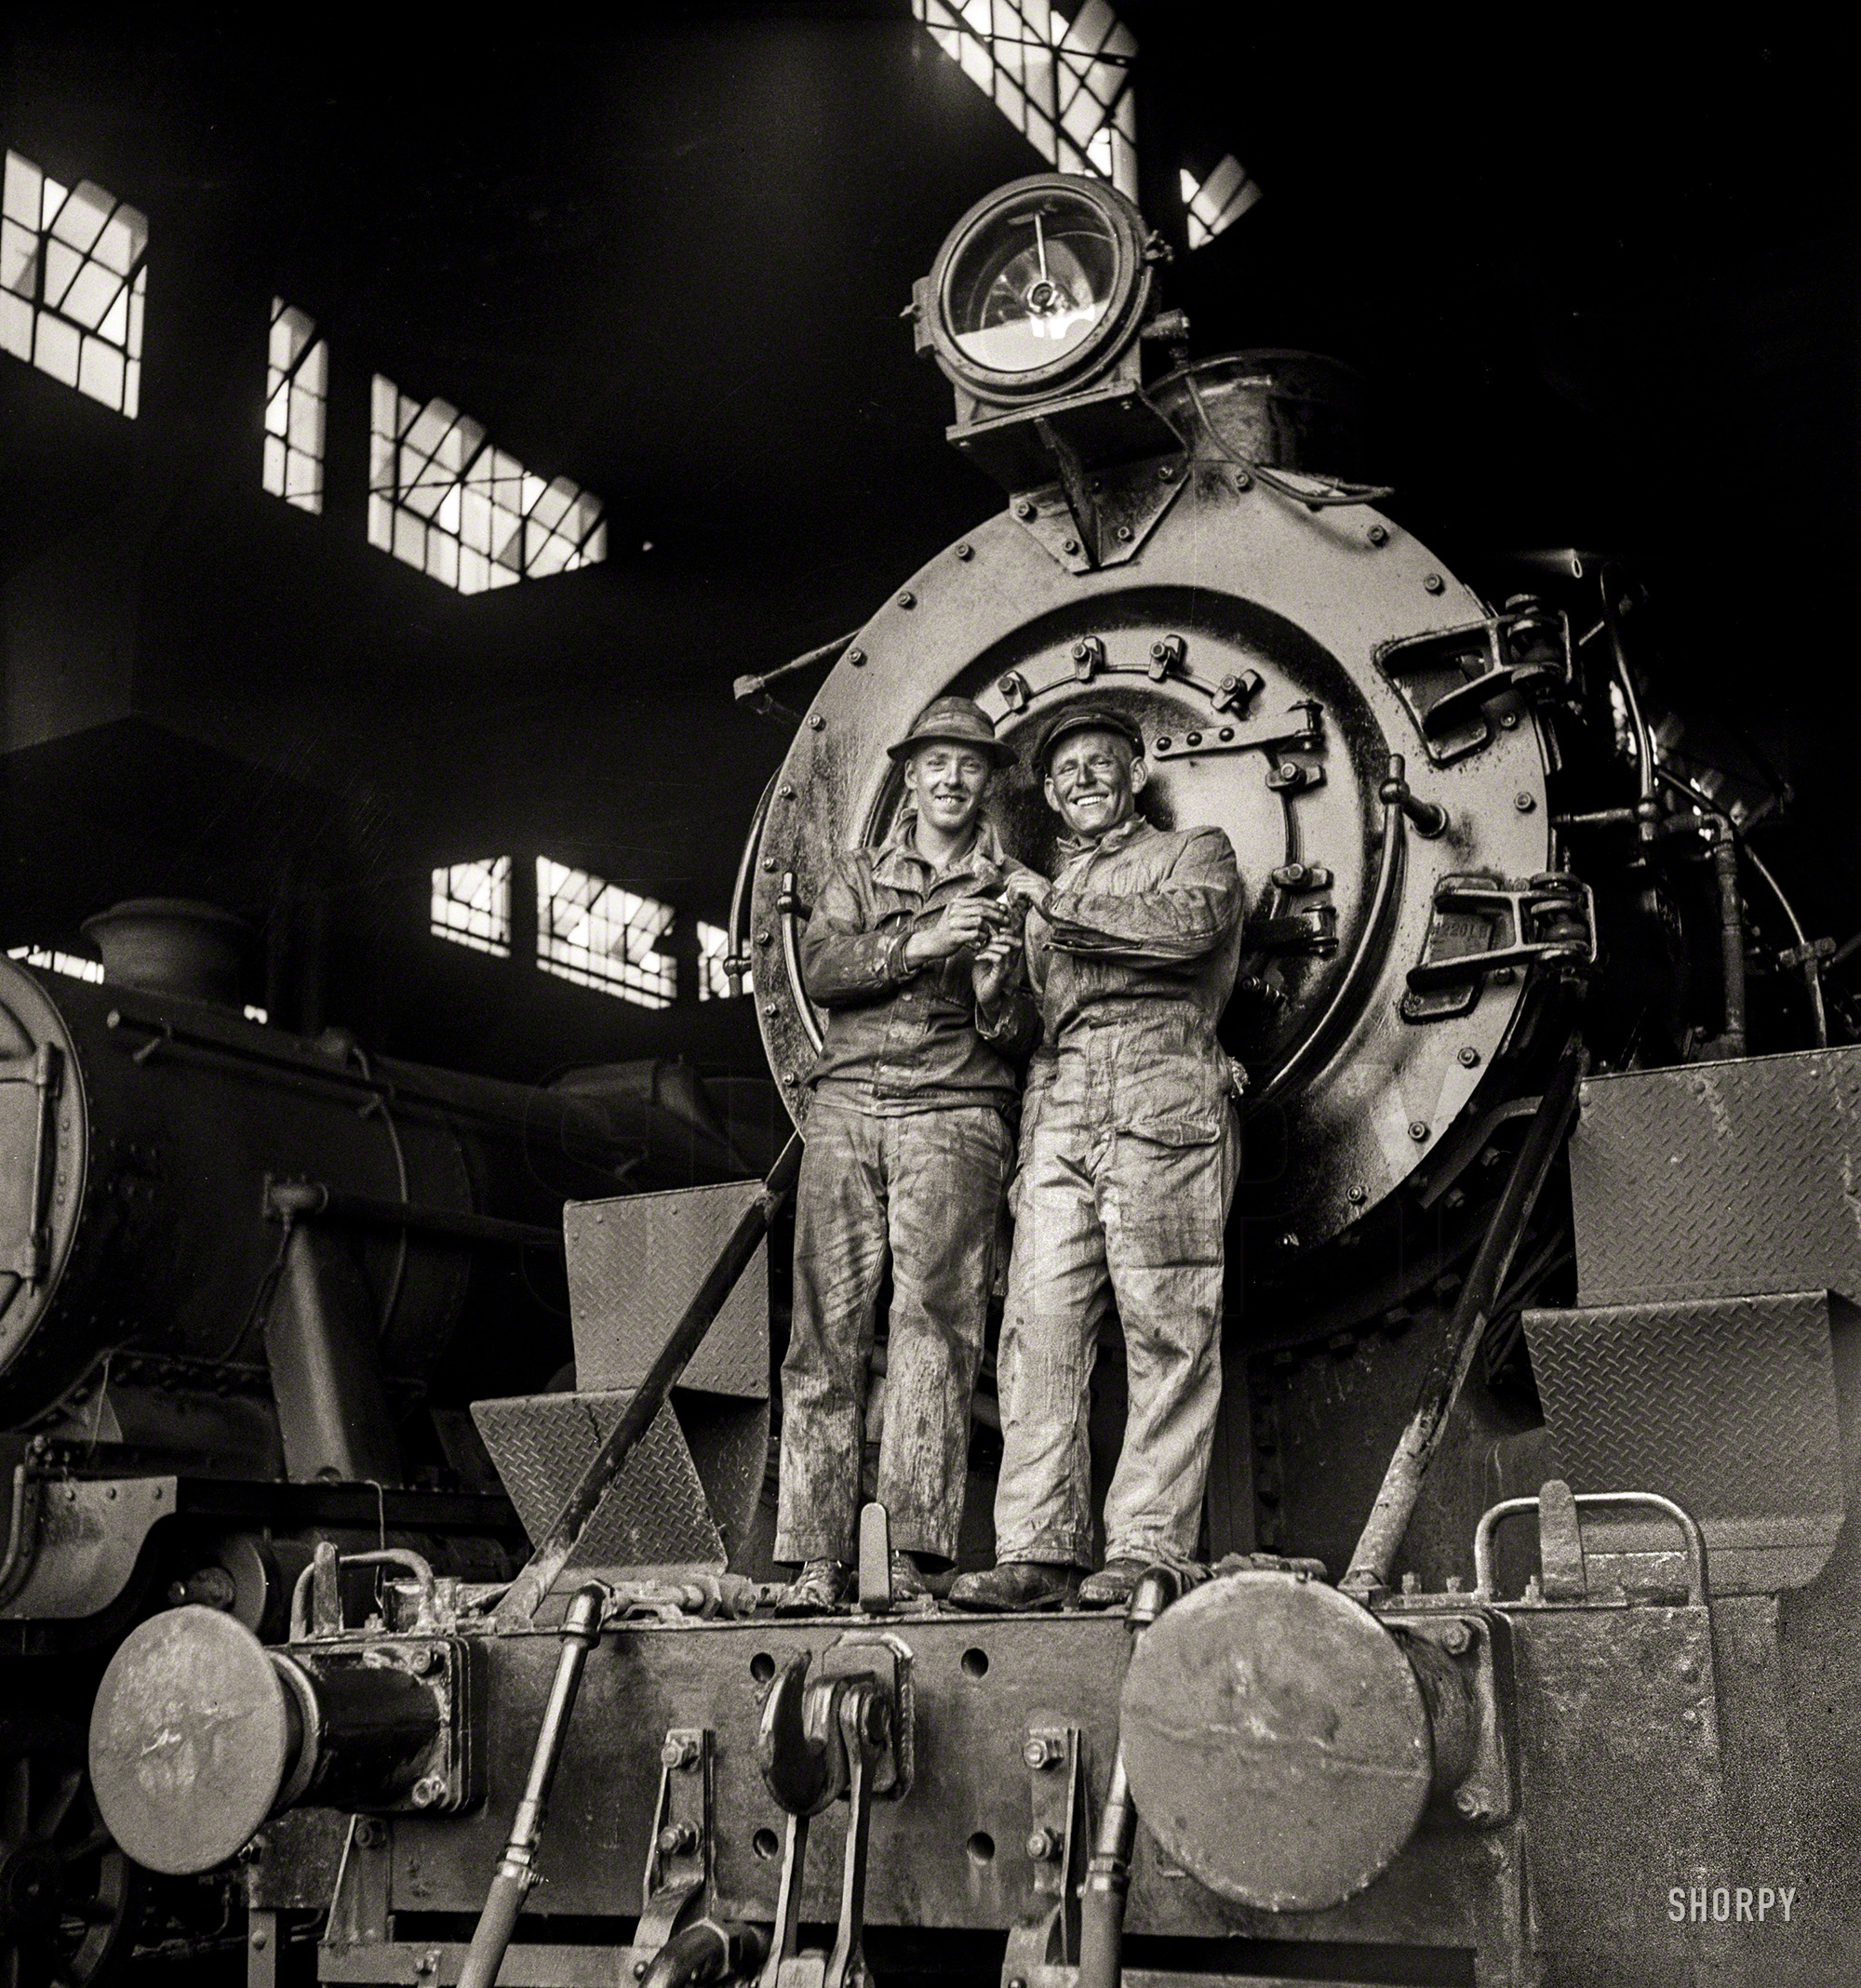 March 1943. "American and British engineers taking time out for a smoke. They are standing on an American locomotive somewhere in Iran." Medium-format negative by Nick Parrino for the Office of War Information. View full size.